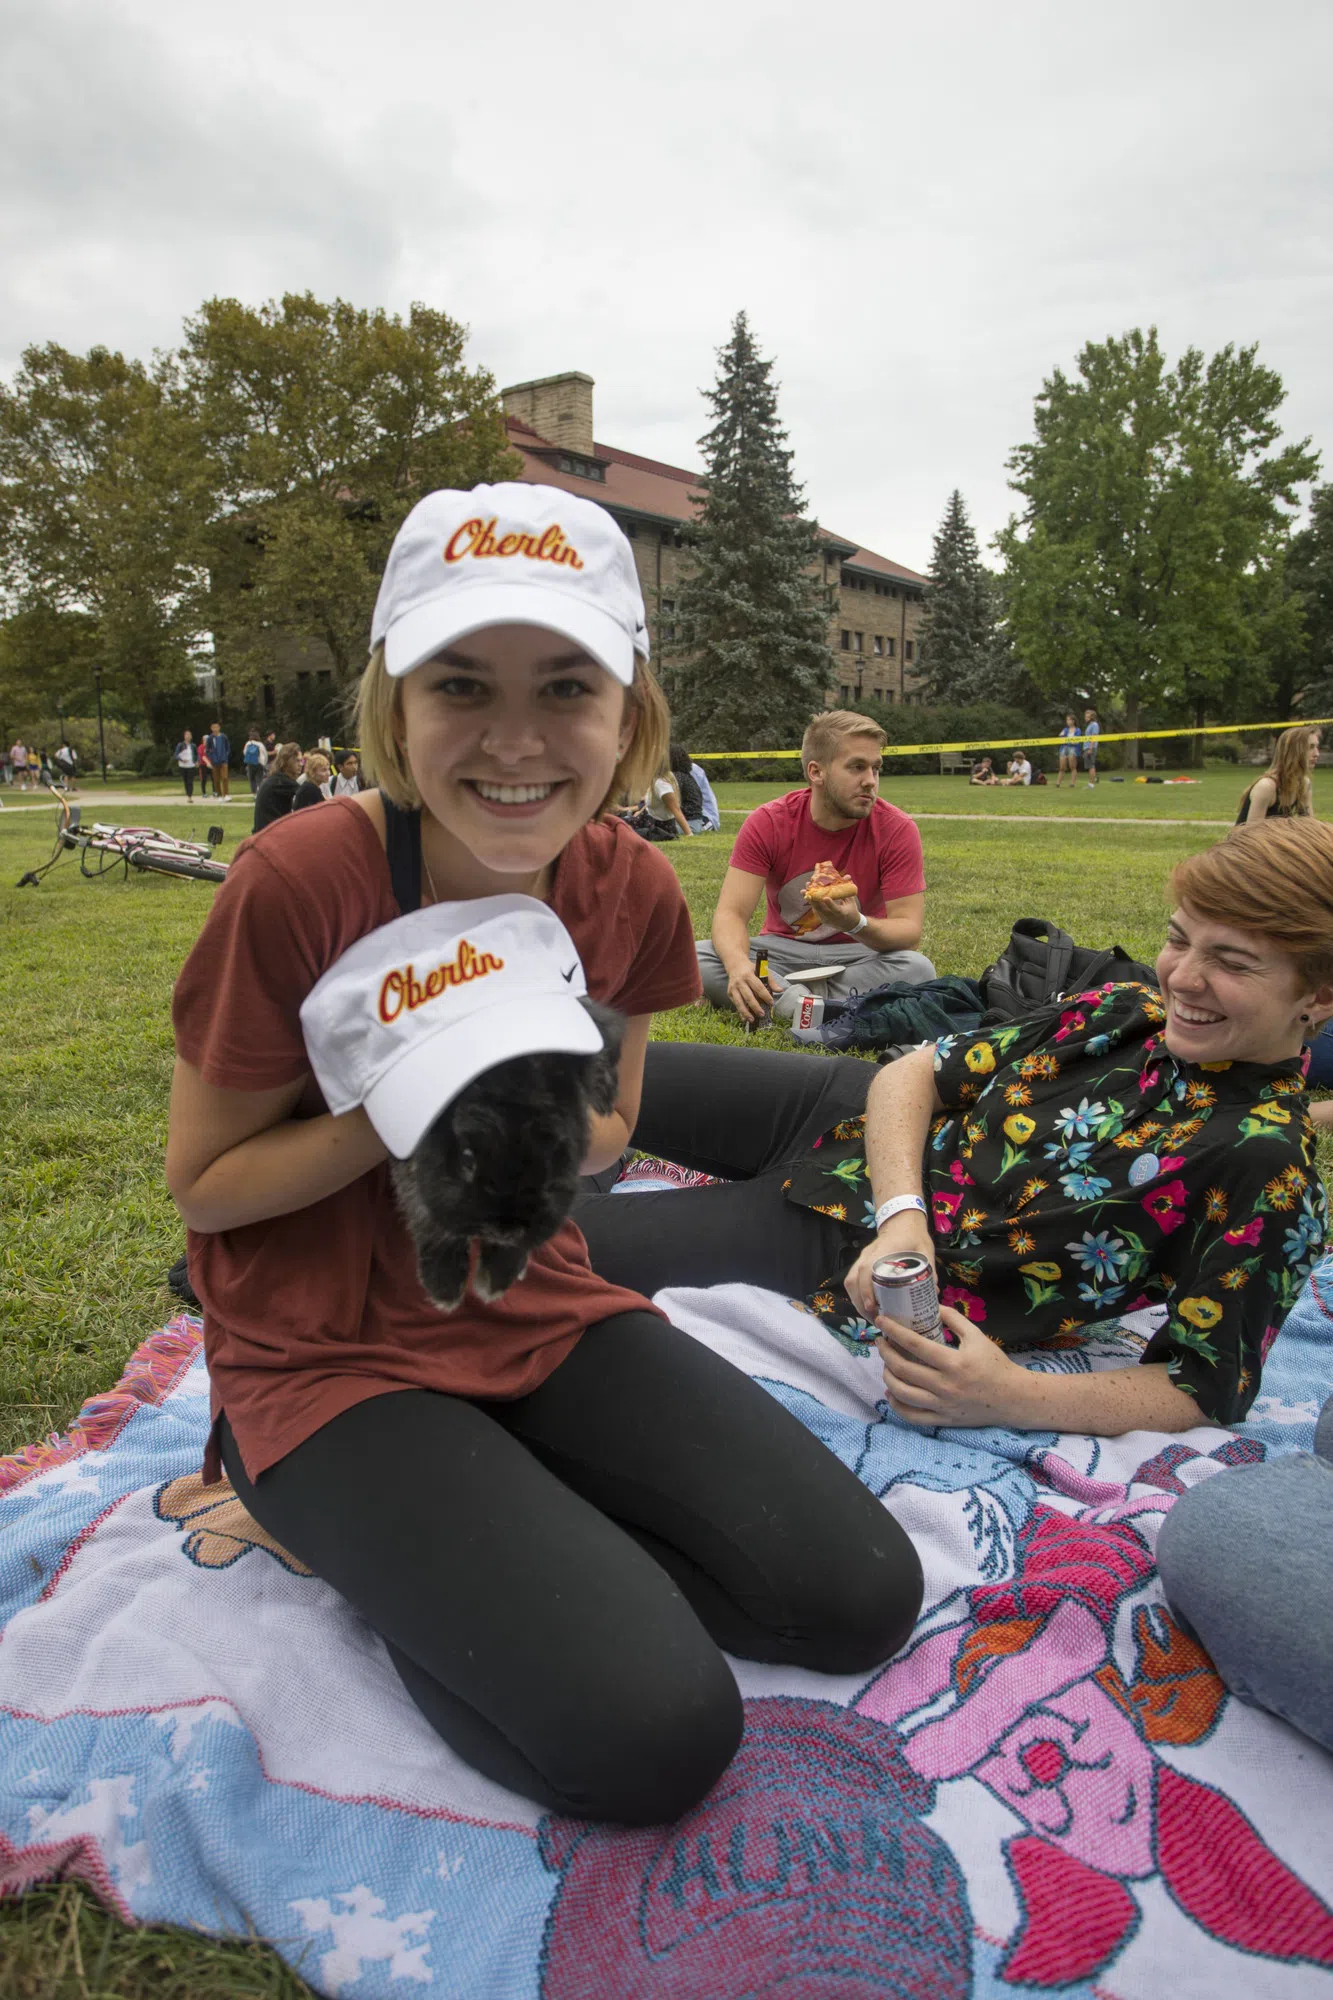 A smiling student shows her rabbit, wearing an Oberlin baseball cap.